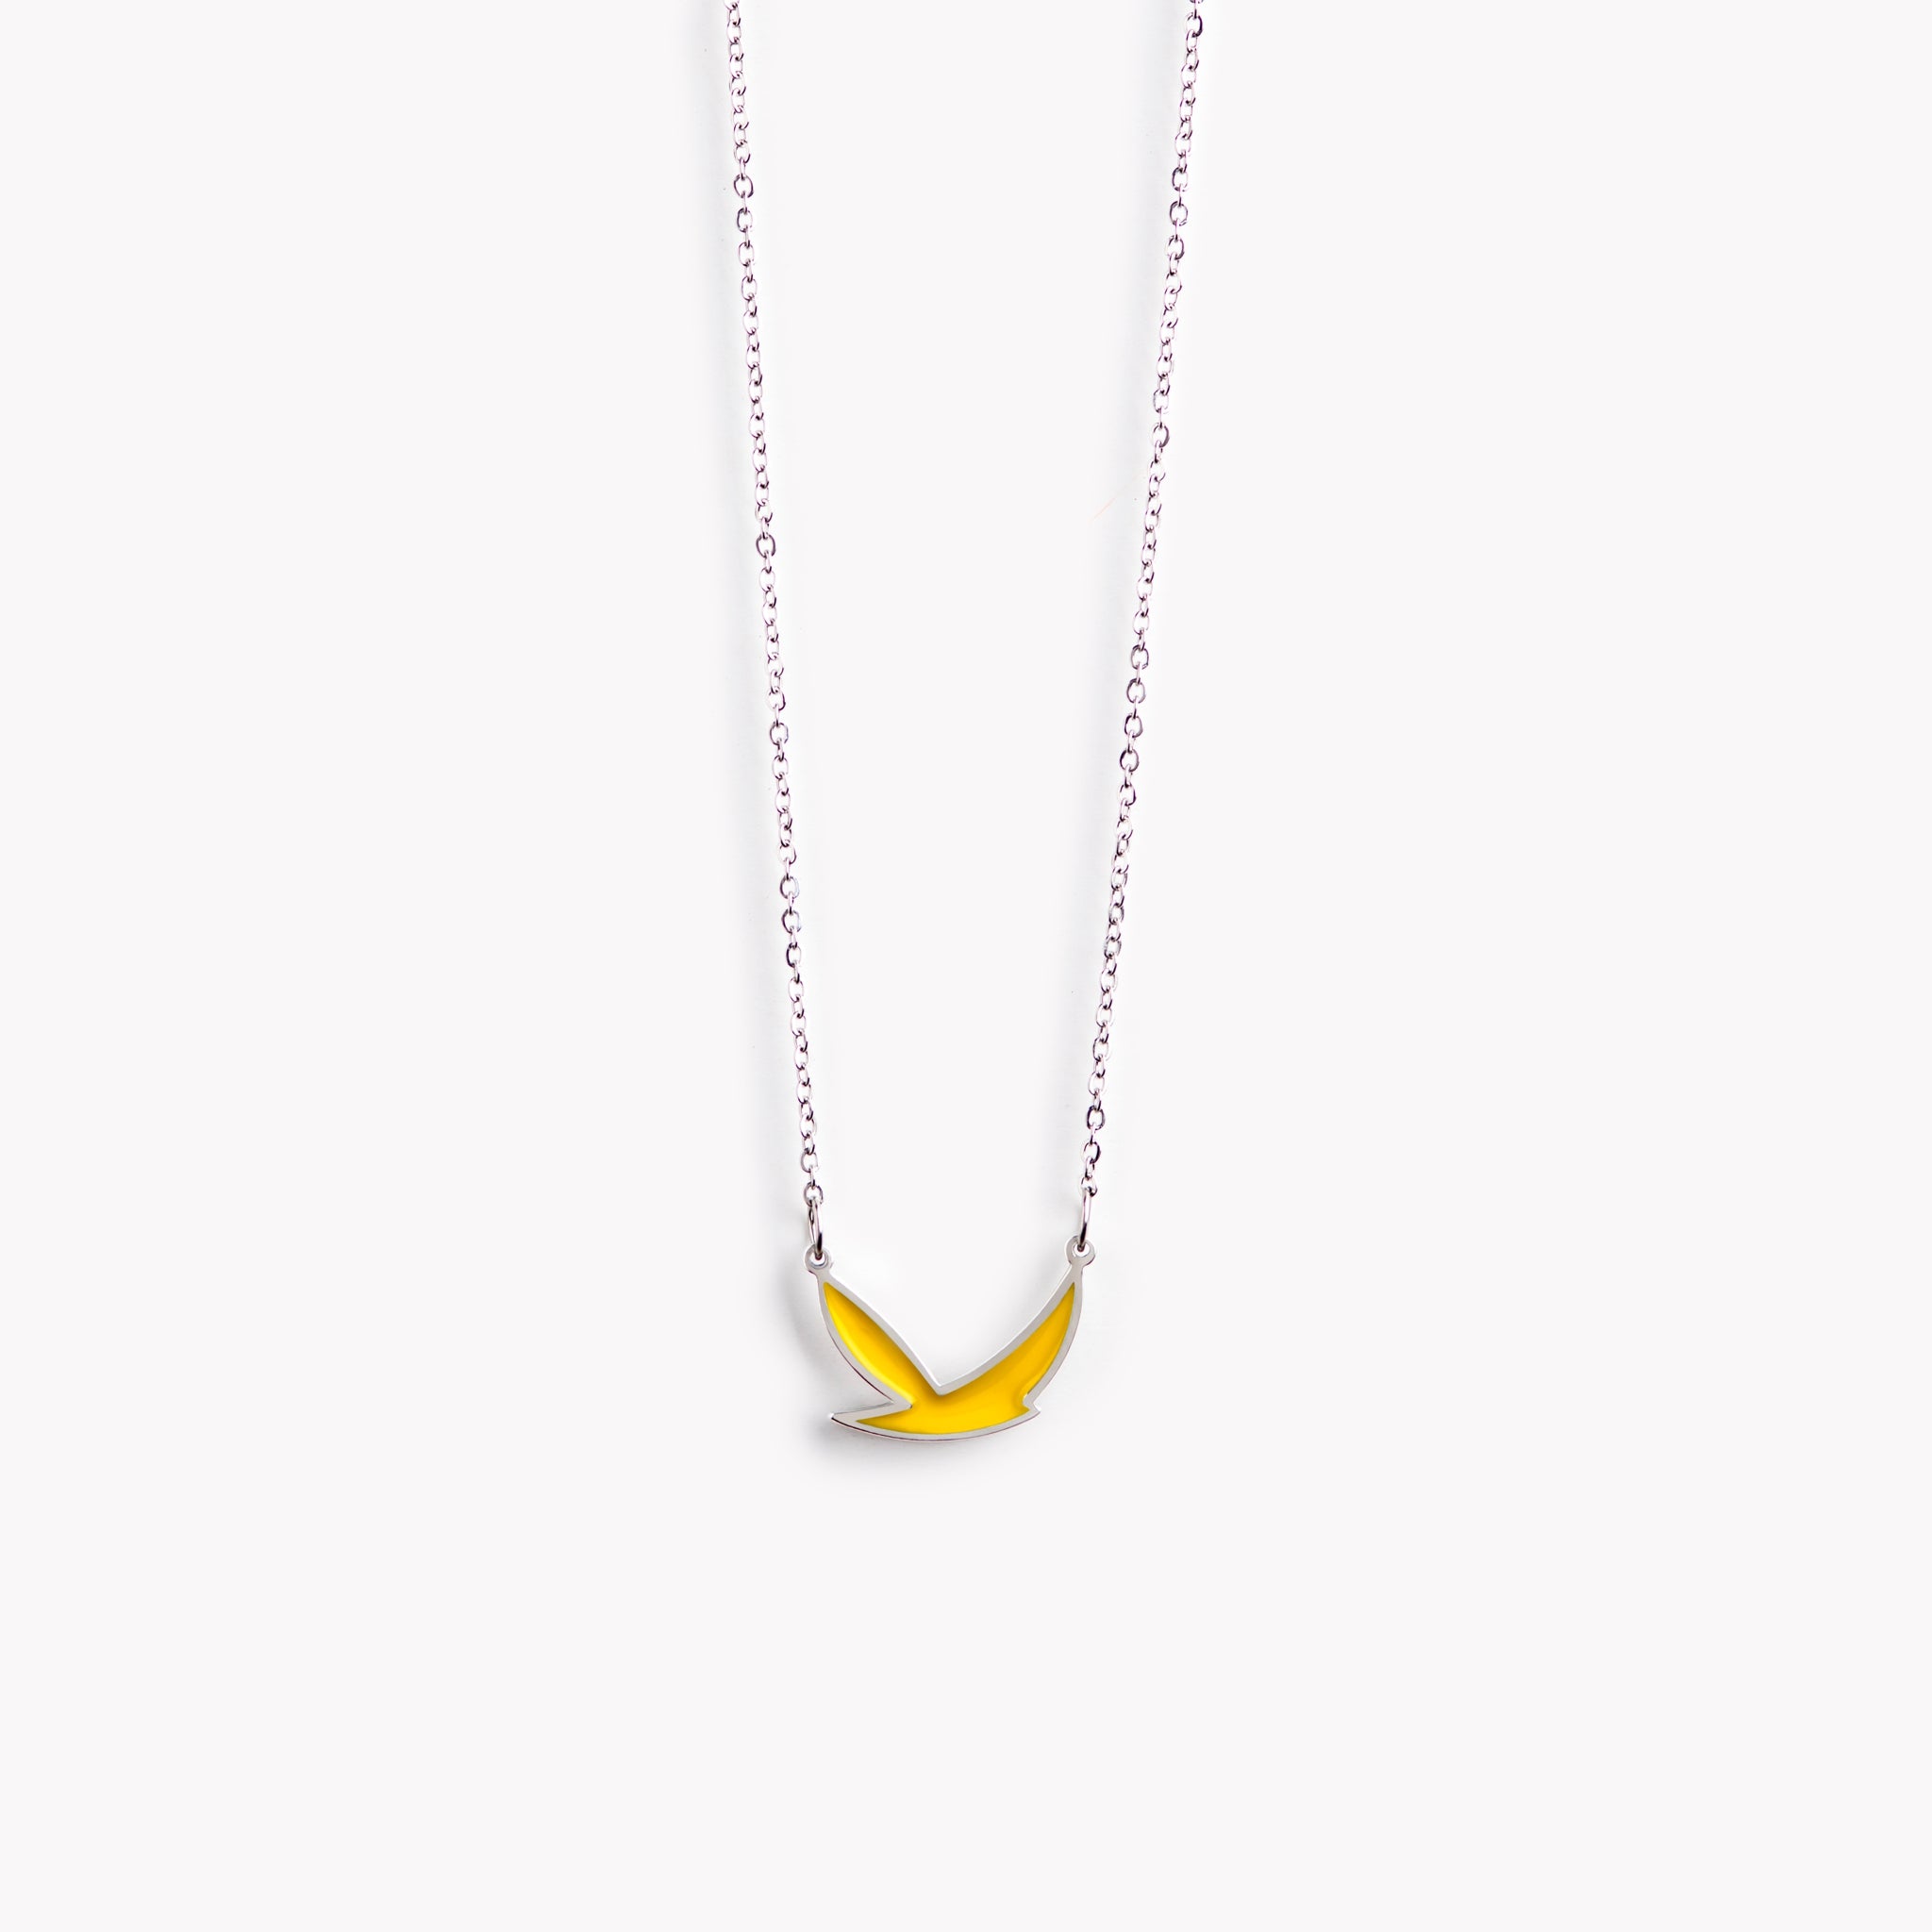 A simple, stylish, and dynamic yellow bird necklace.